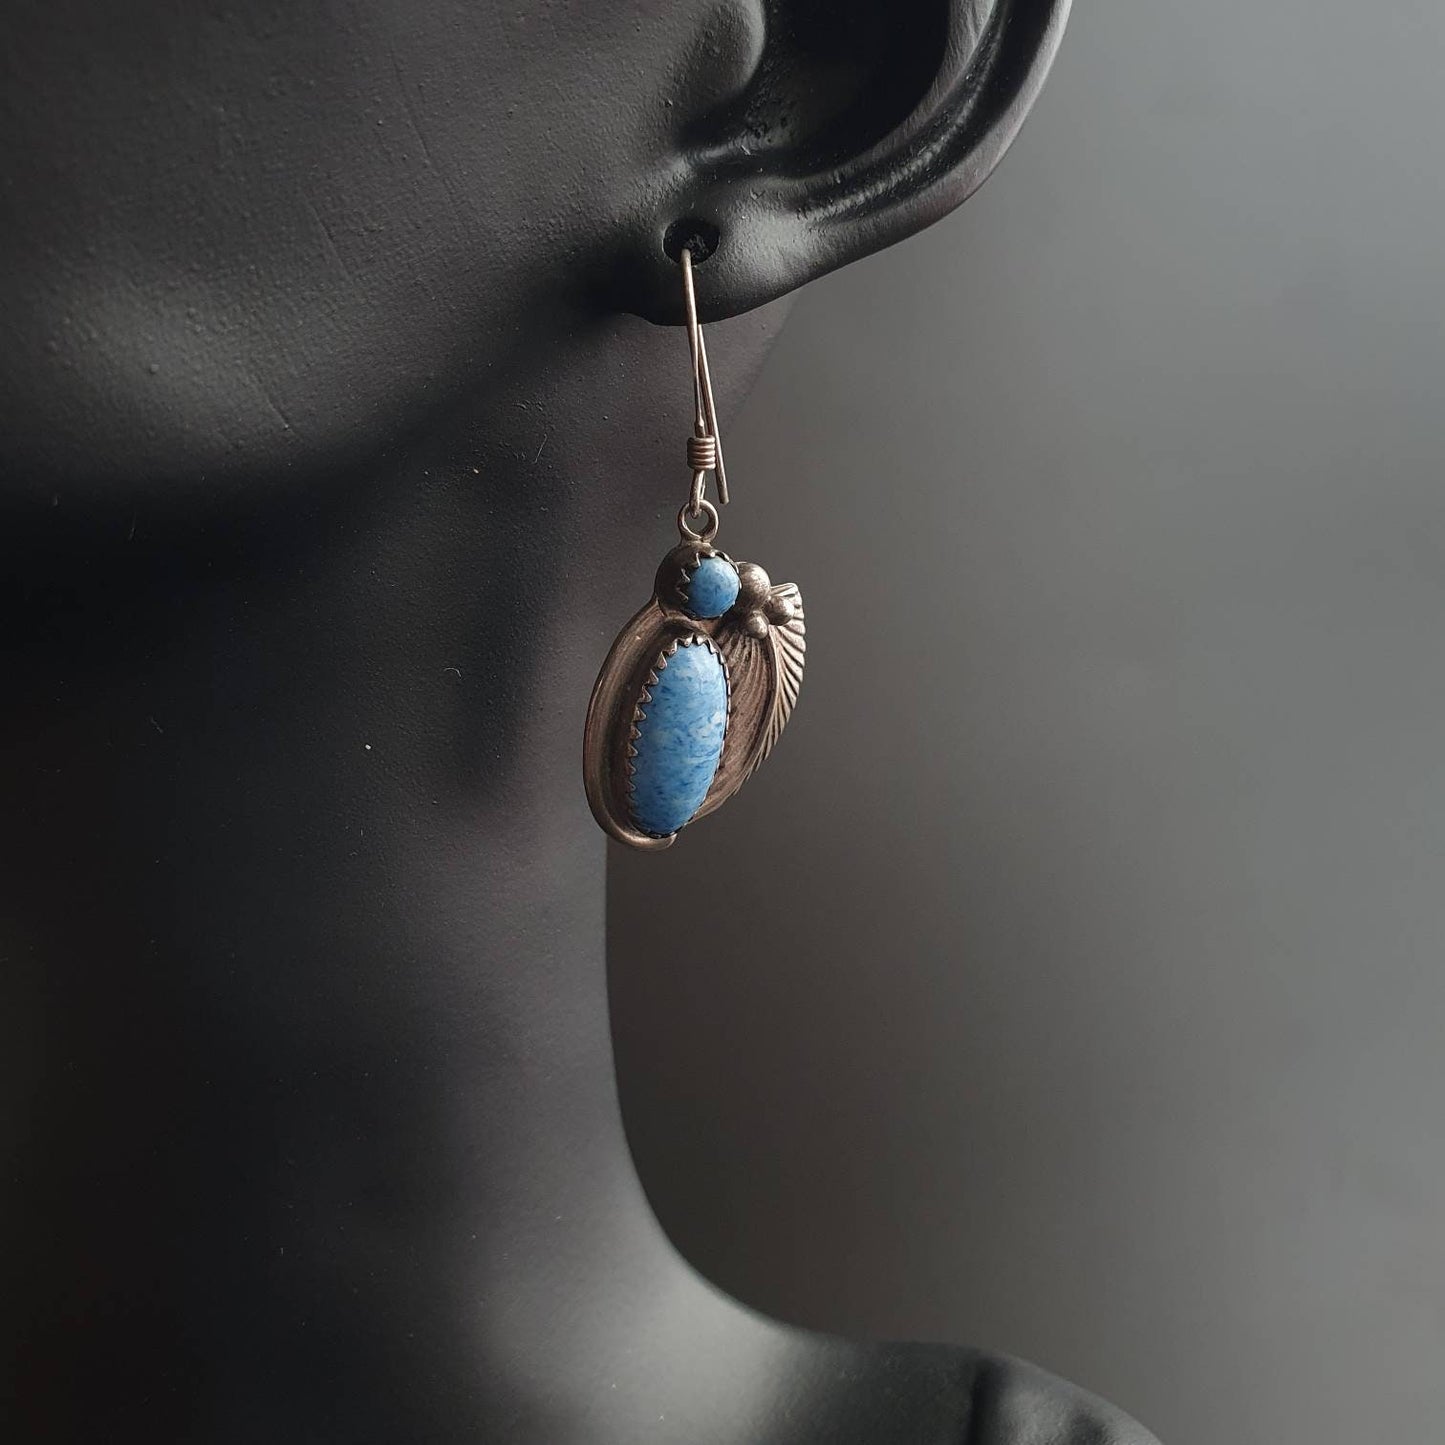 Navajo,Native American, Sterling Silver,Turquoise Earrings. Leaf and hogan, dangle earrings, gifts, unique, rare, 925,silver, earrings,